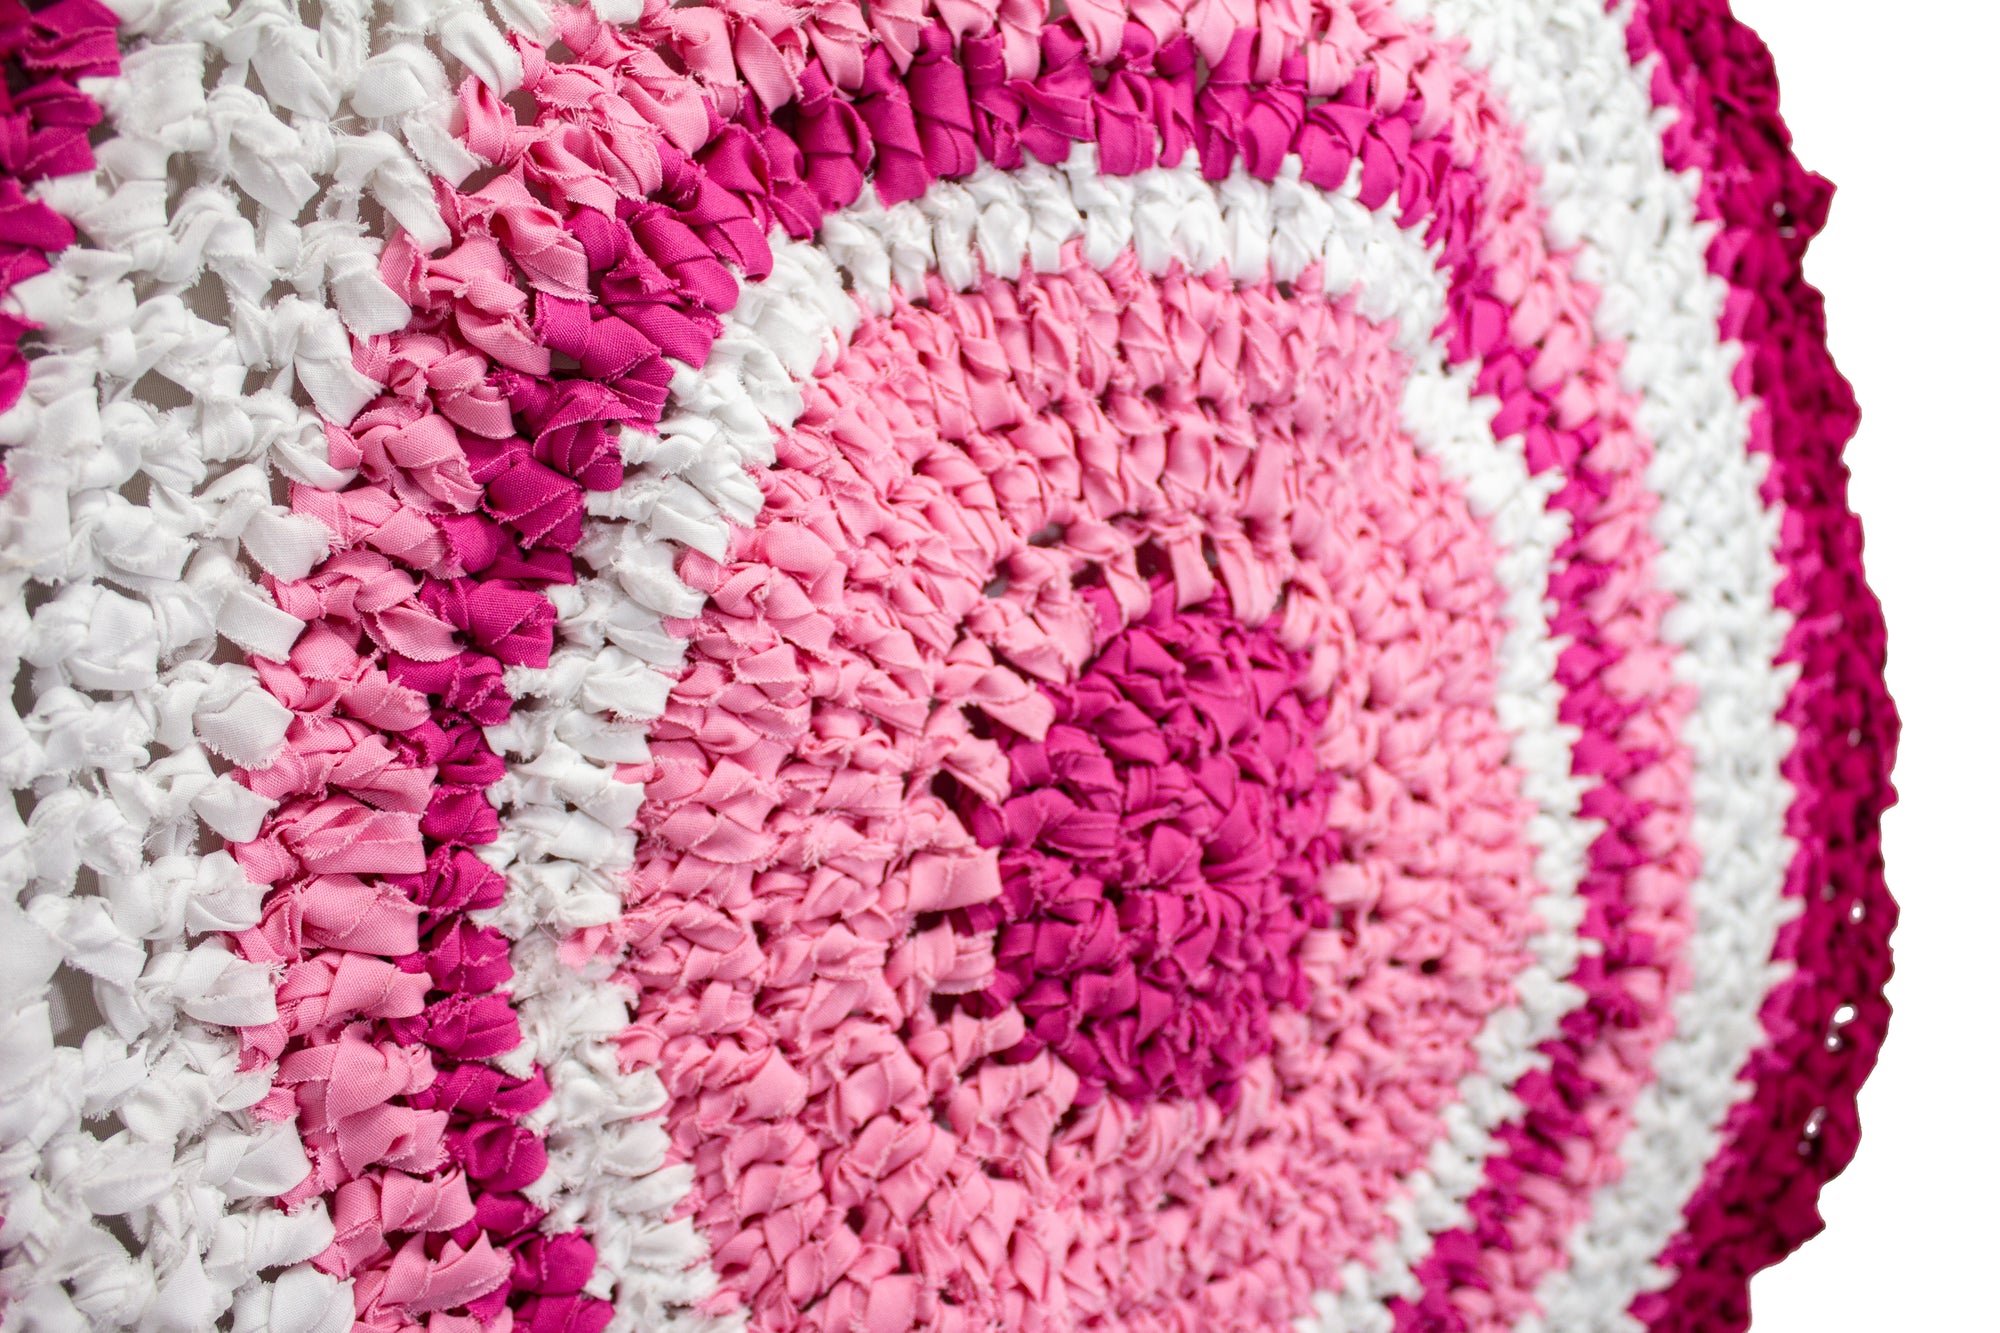 Crocheted Rug-White and Pinks